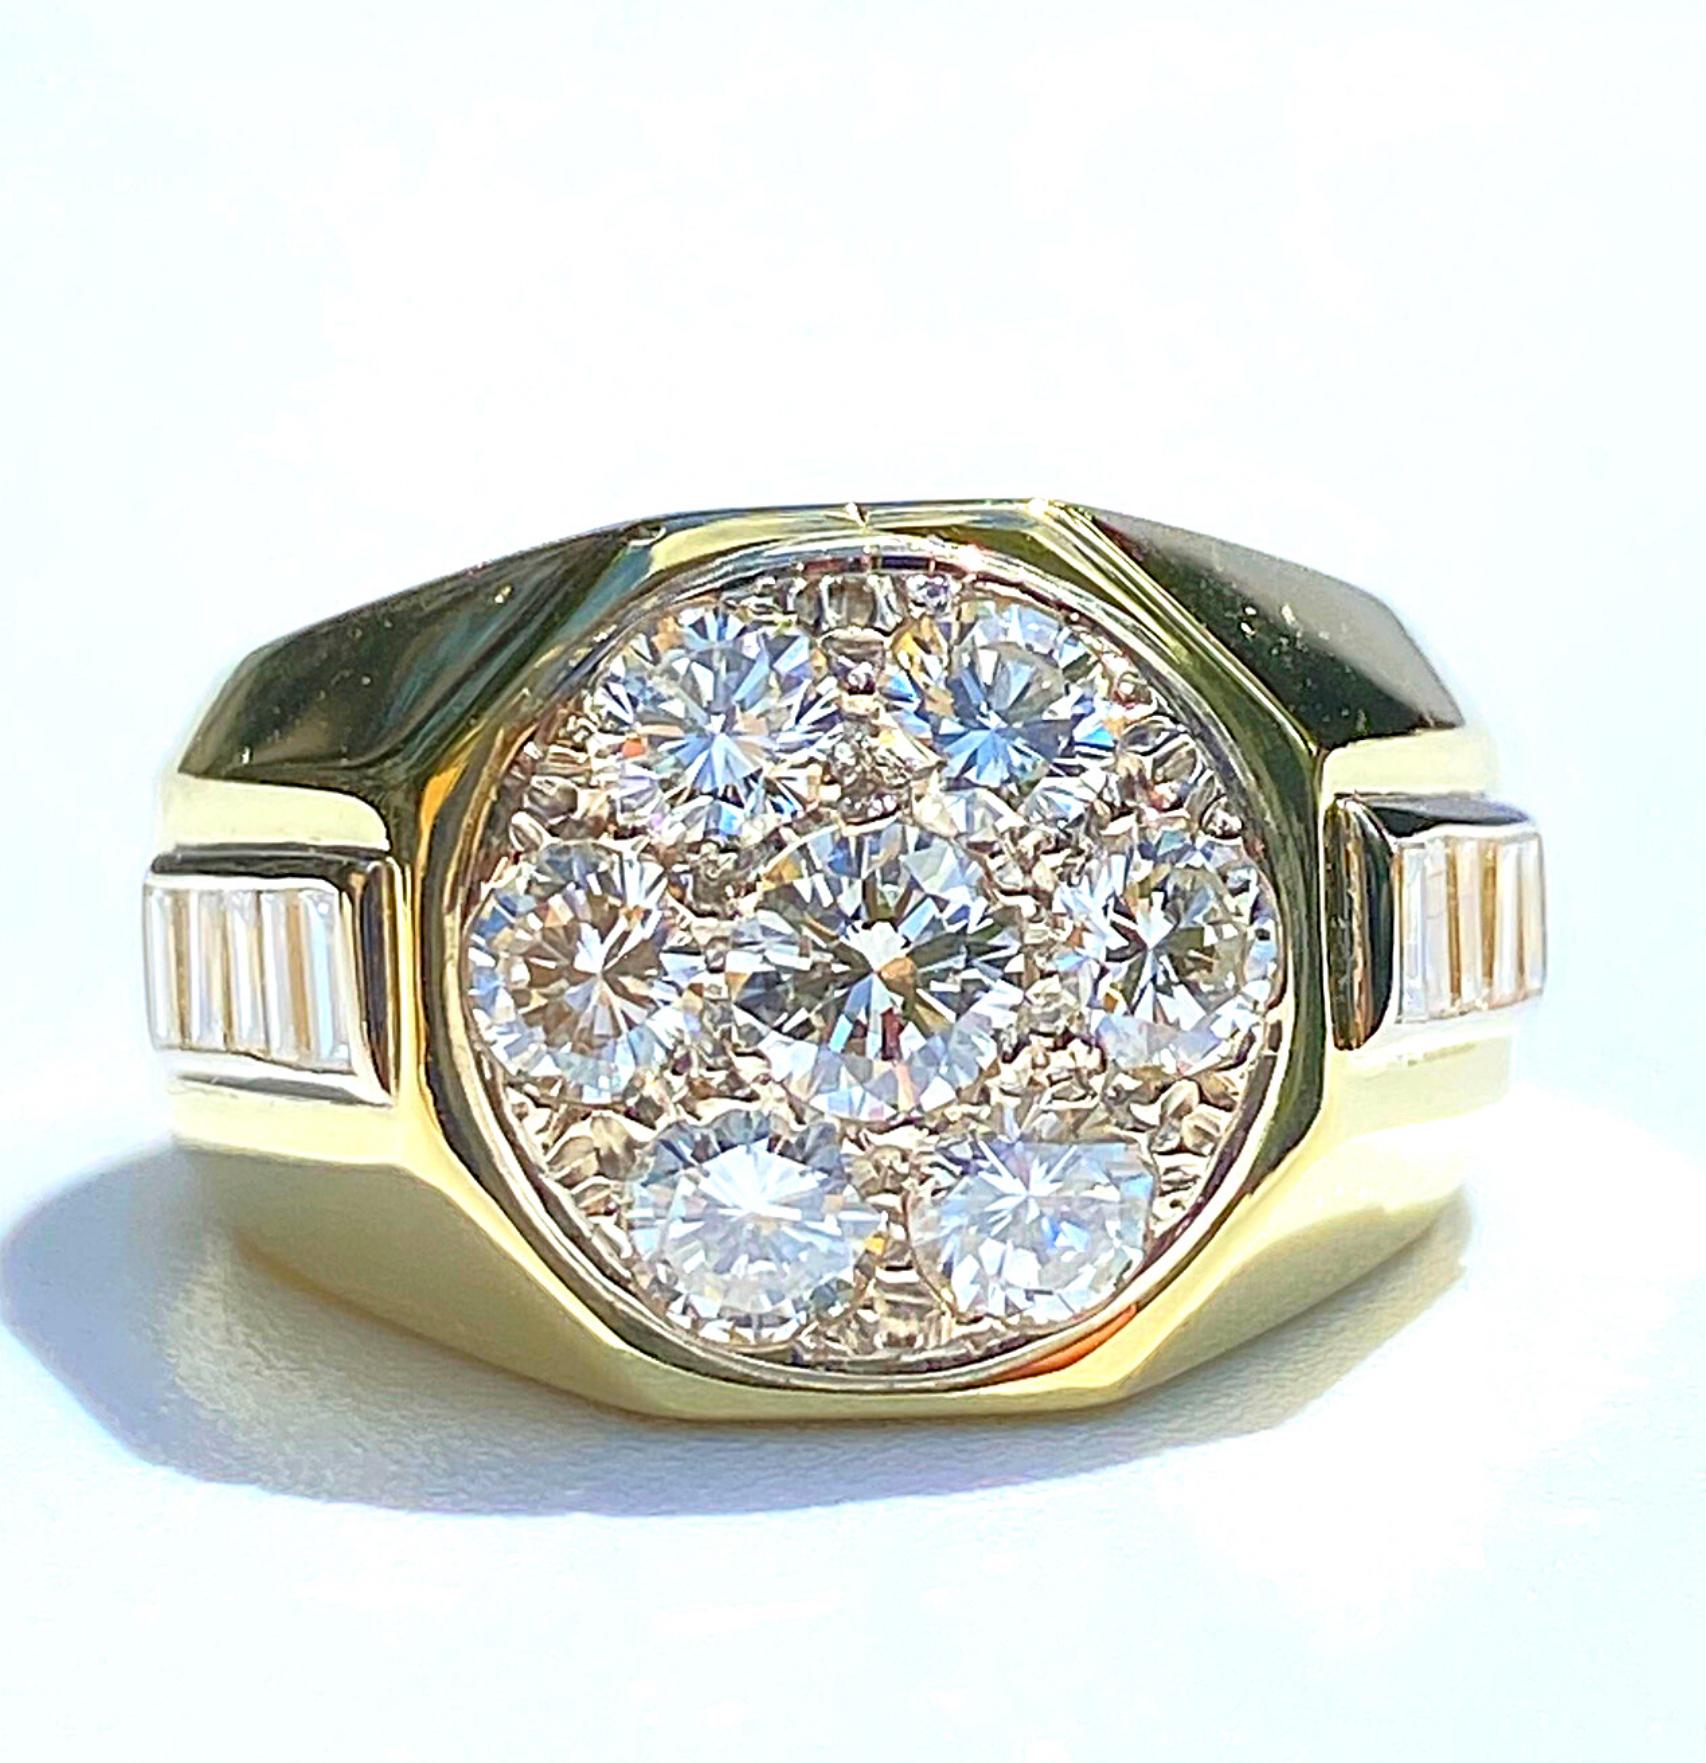 Centered by seven Round-Brilliant Cut Diamonds totaling ~2.60 Carats, accented by an additional 10 Baguette-Cut Diamonds, and set in 18K Yellow Gold, this 18K Yellow Gold and White Diamond Men's cluster ring is a collection staple: a classic men's